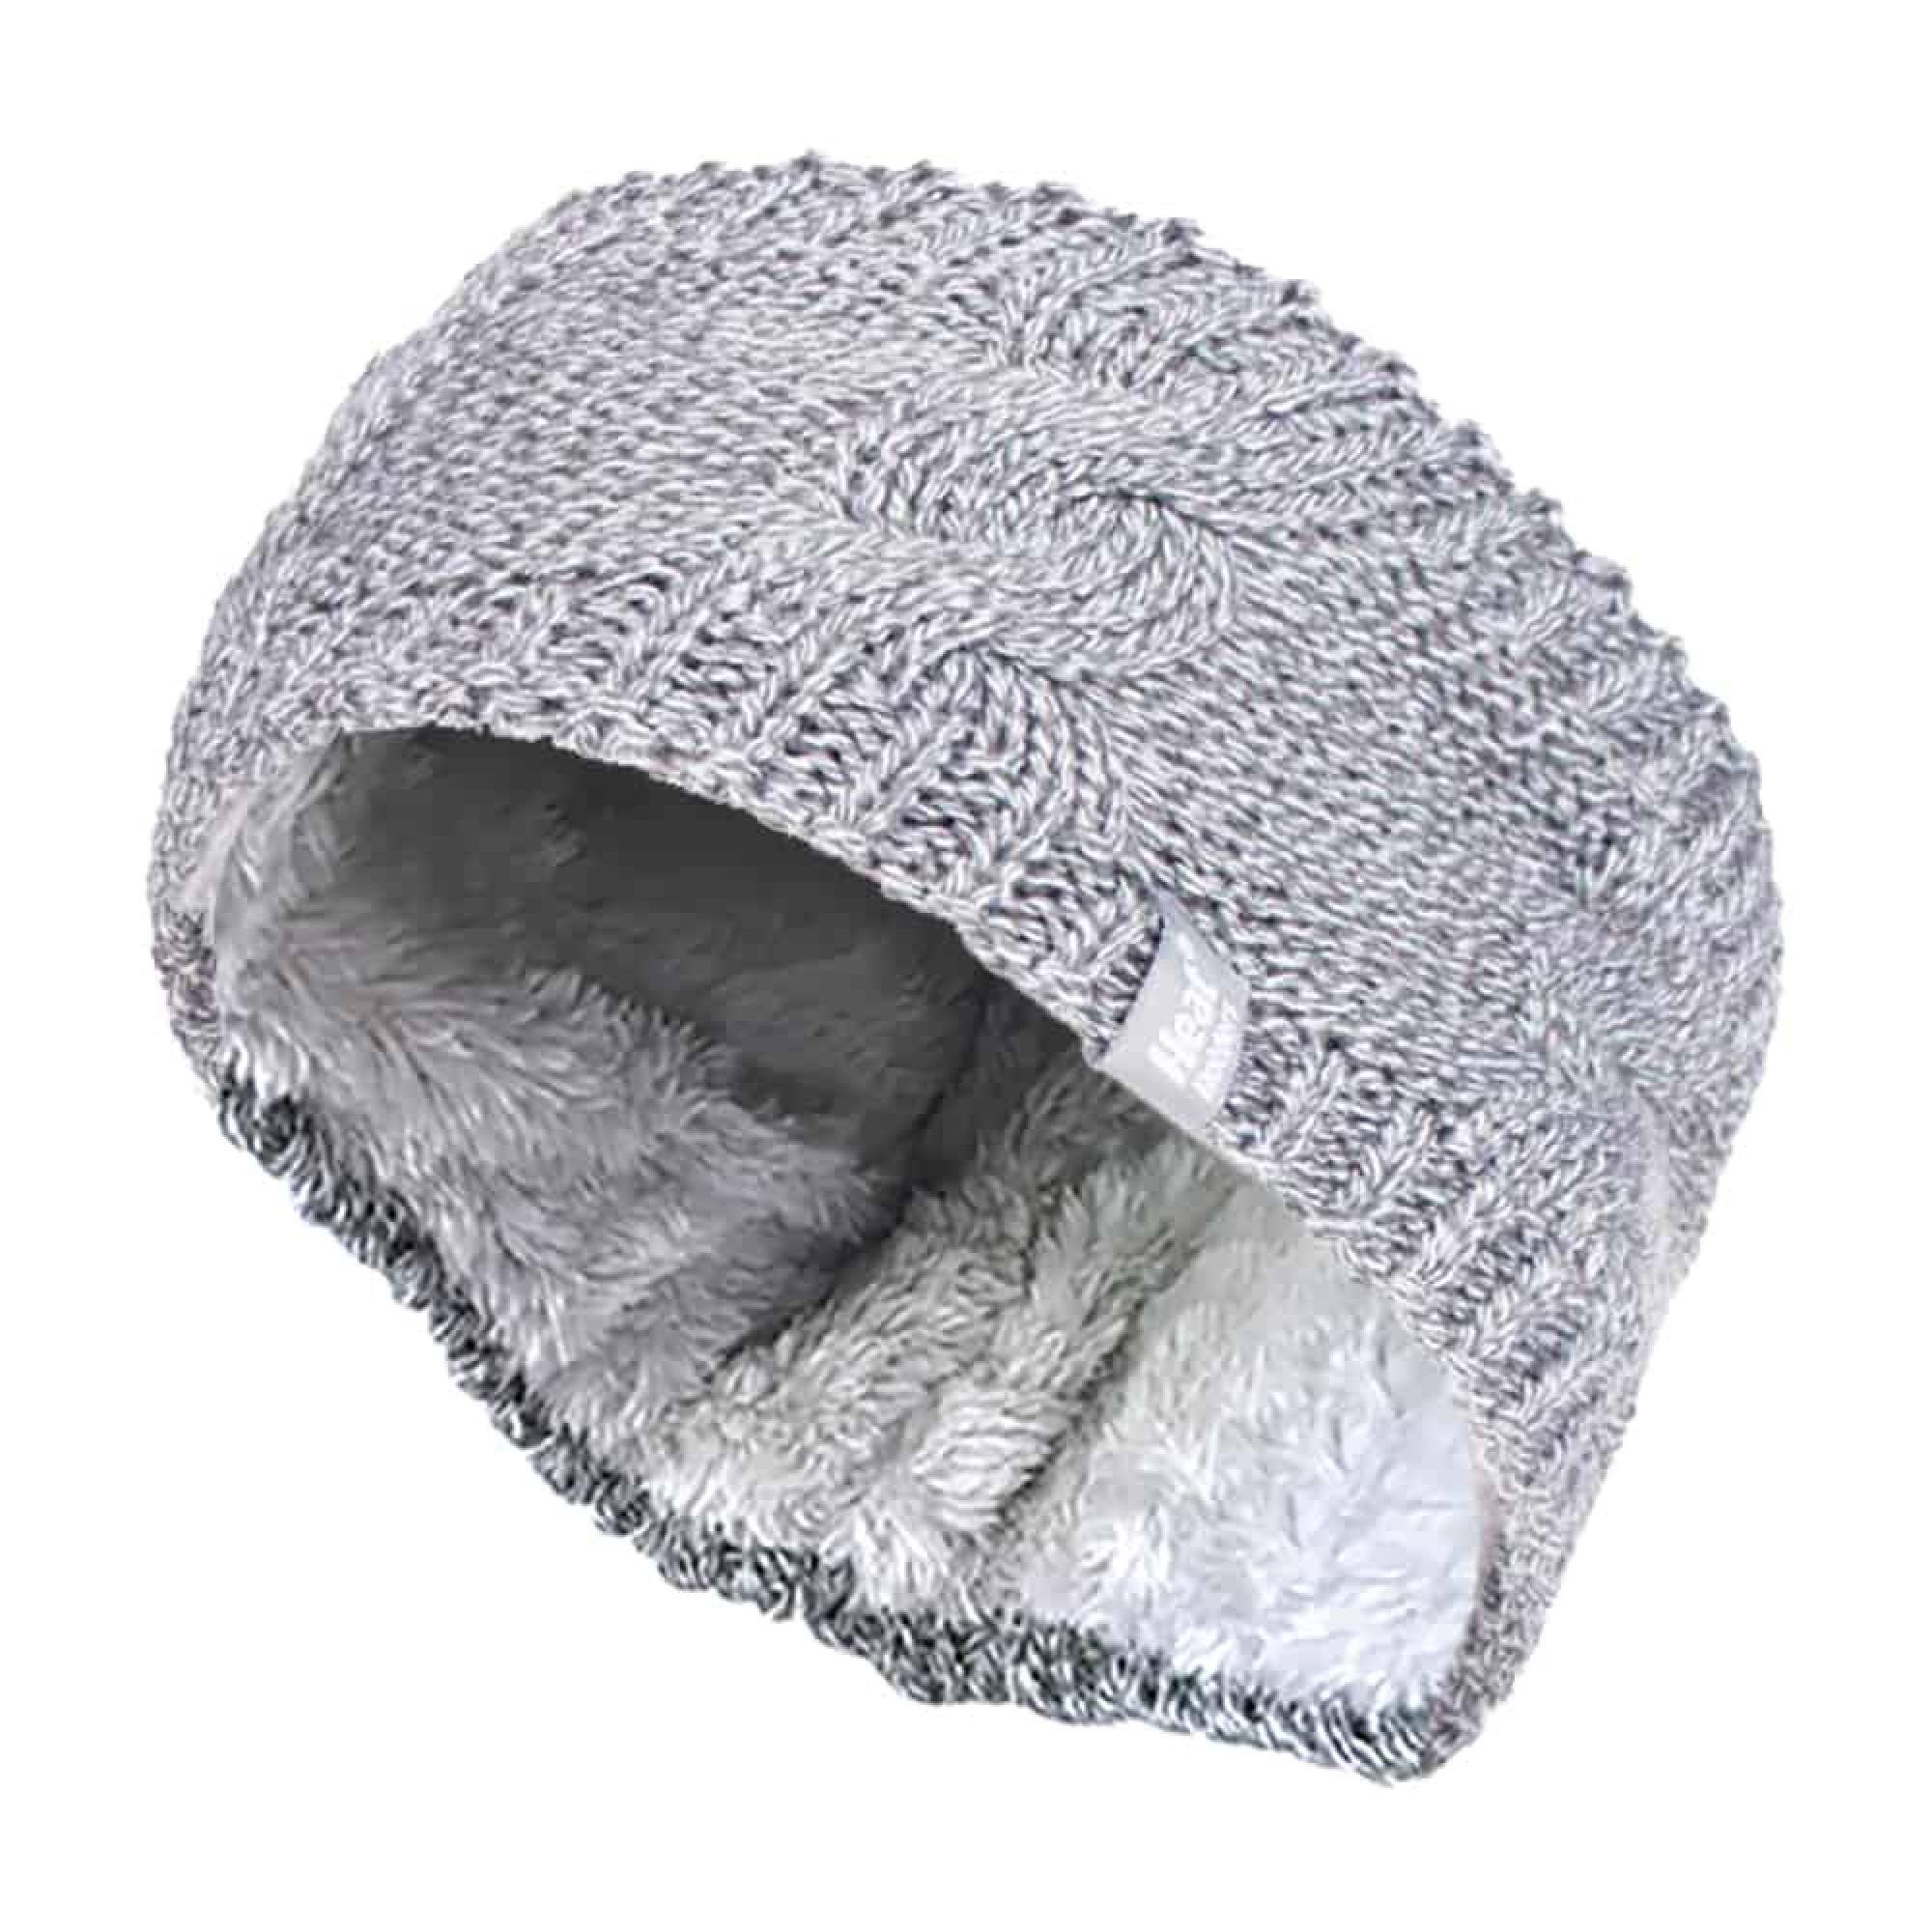 Ladies Cable Knitted Fleece Lined Thermal Winter Ear Warmer Headband 1/4